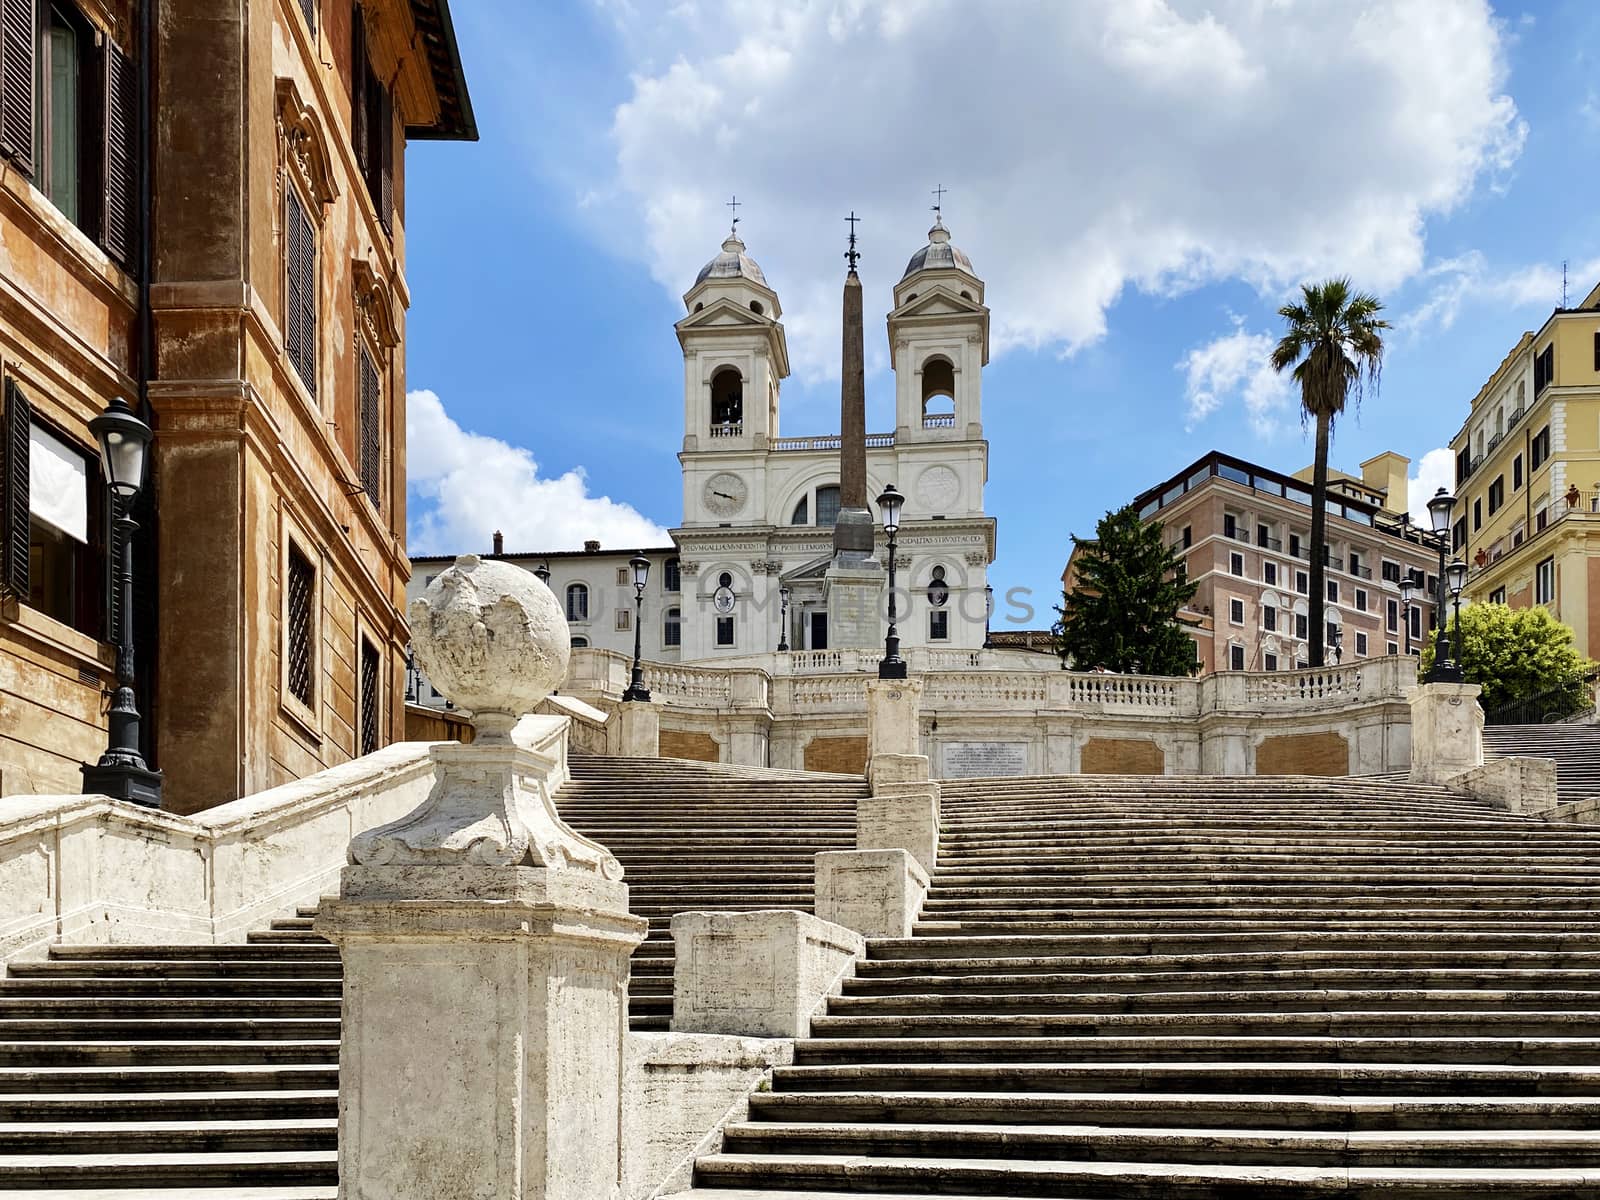 the Spanish Steps unusually empty during the day during the quarantine period due to the spread of the coronavirus. by rarrarorro